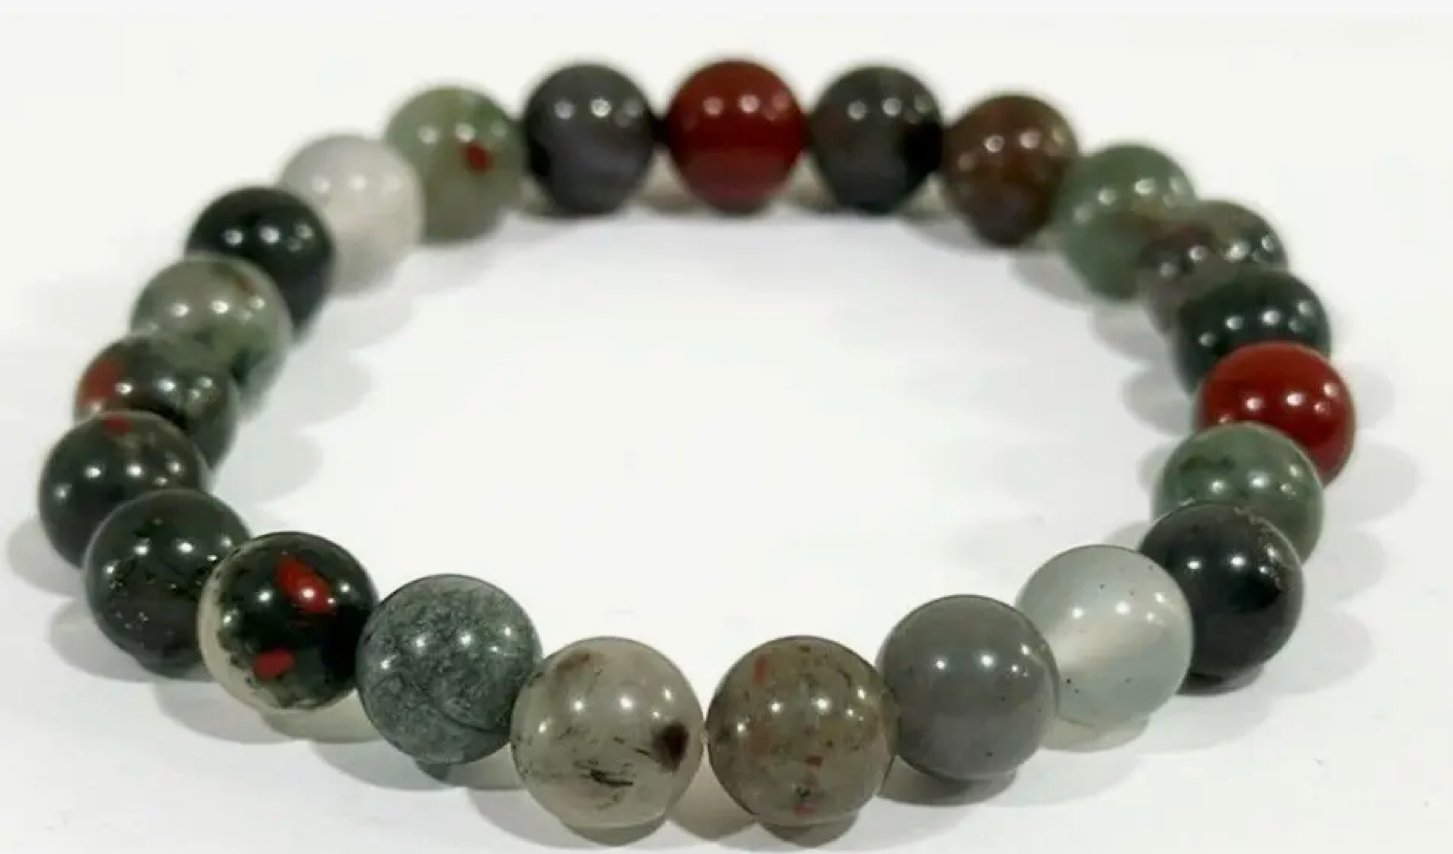 African Bloodstone Crystal Healing Bracelet - Stone of Health and Revitalisation - CS1234 - The Hare and the Moon